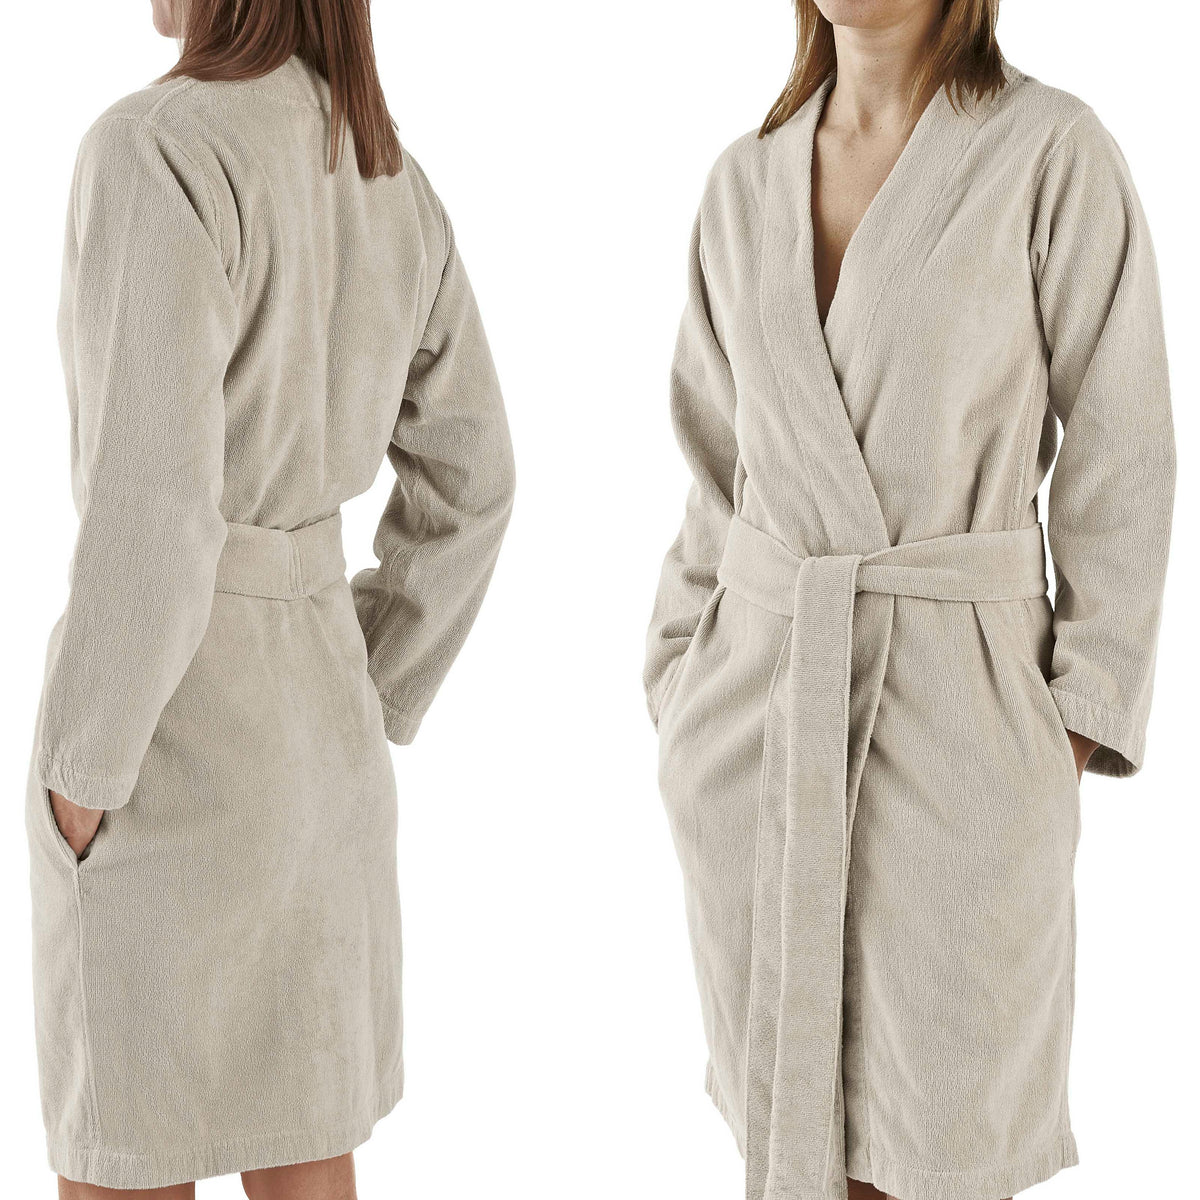 Abyss Spa Bath Robes and Slippers Front and Back Gris Fine Linens